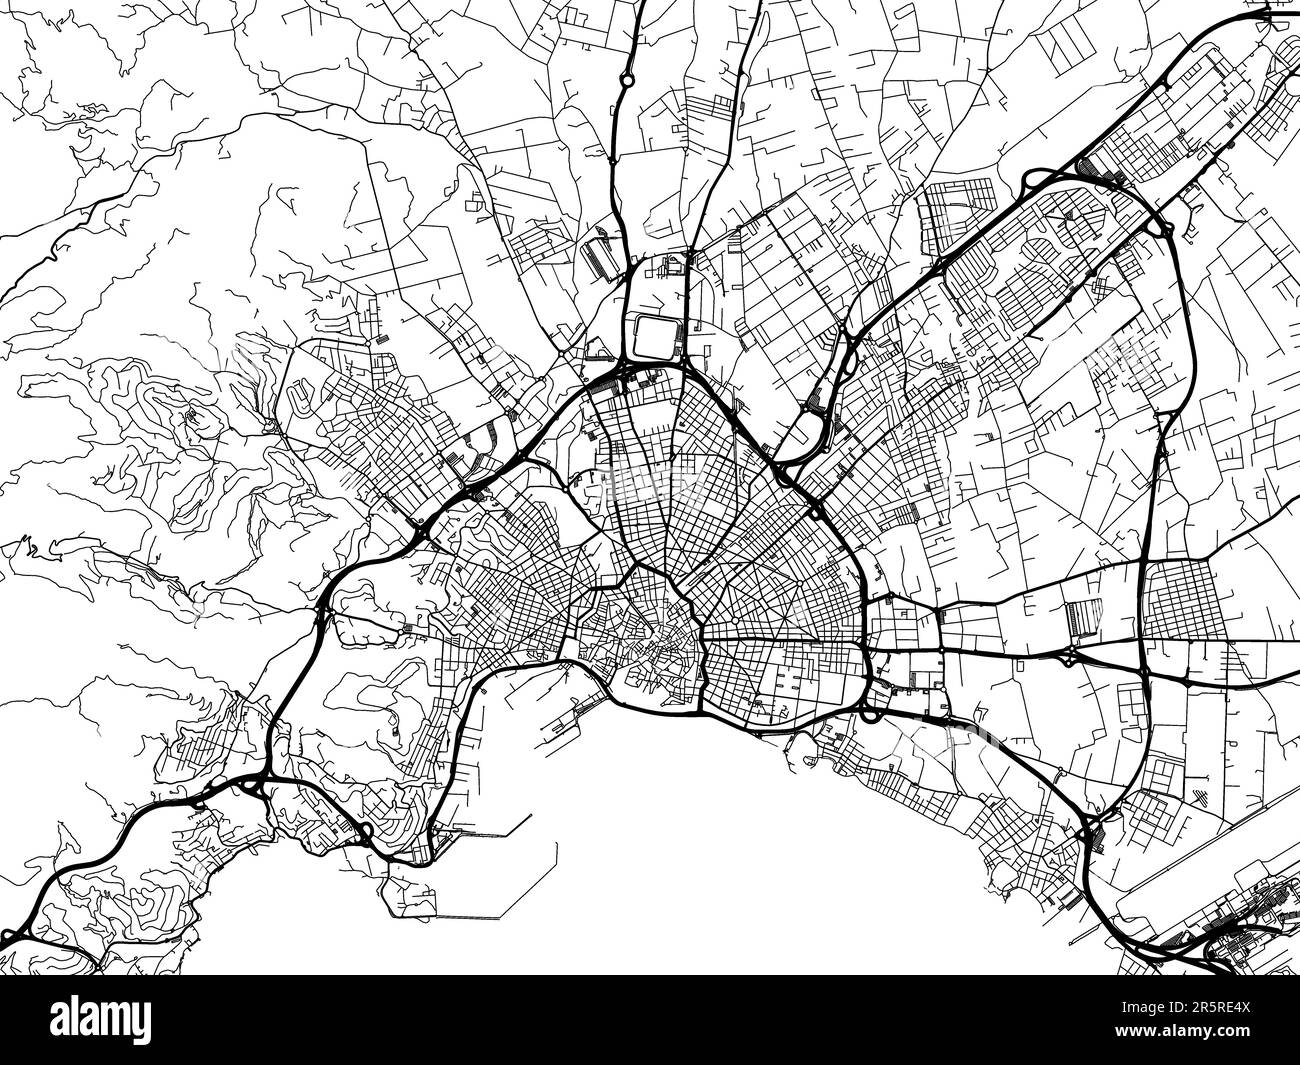 Vector road map of the city of  Palma de Mallorca in Spain on a white background. Stock Photo